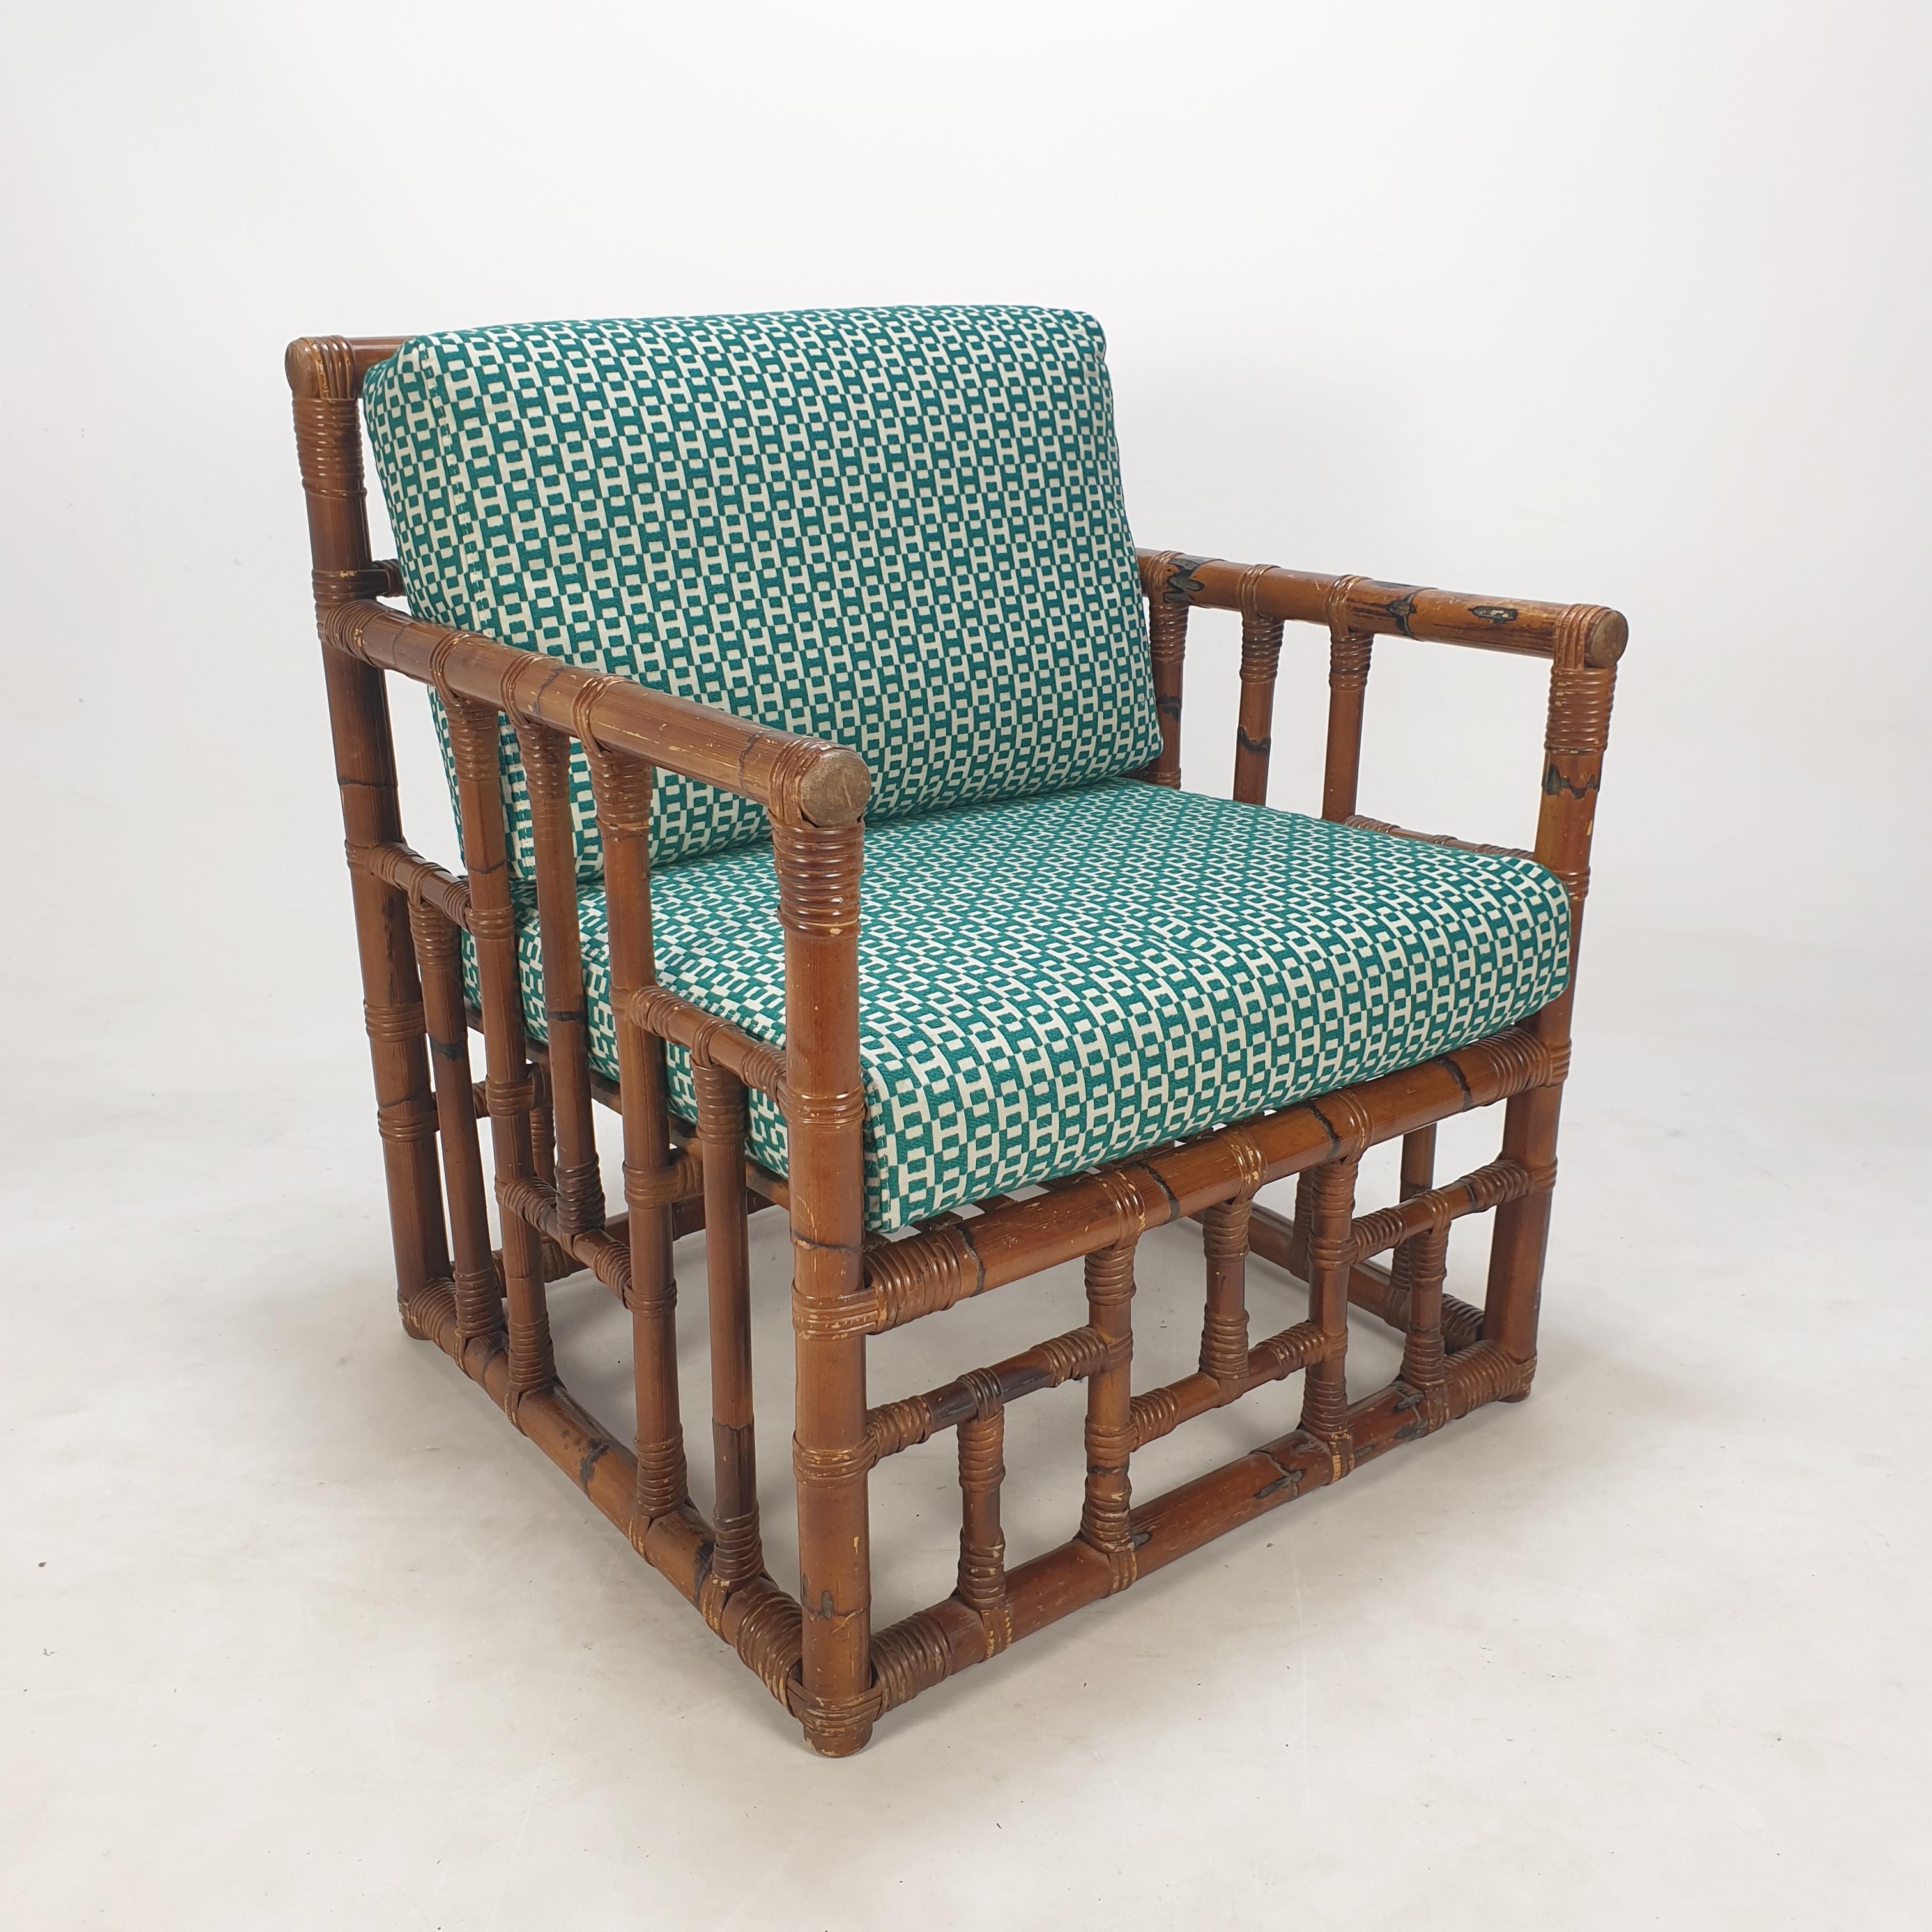 Pair of Italian Bamboo Lounge Chairs with Hermès Upholstery, 1970's For Sale 8